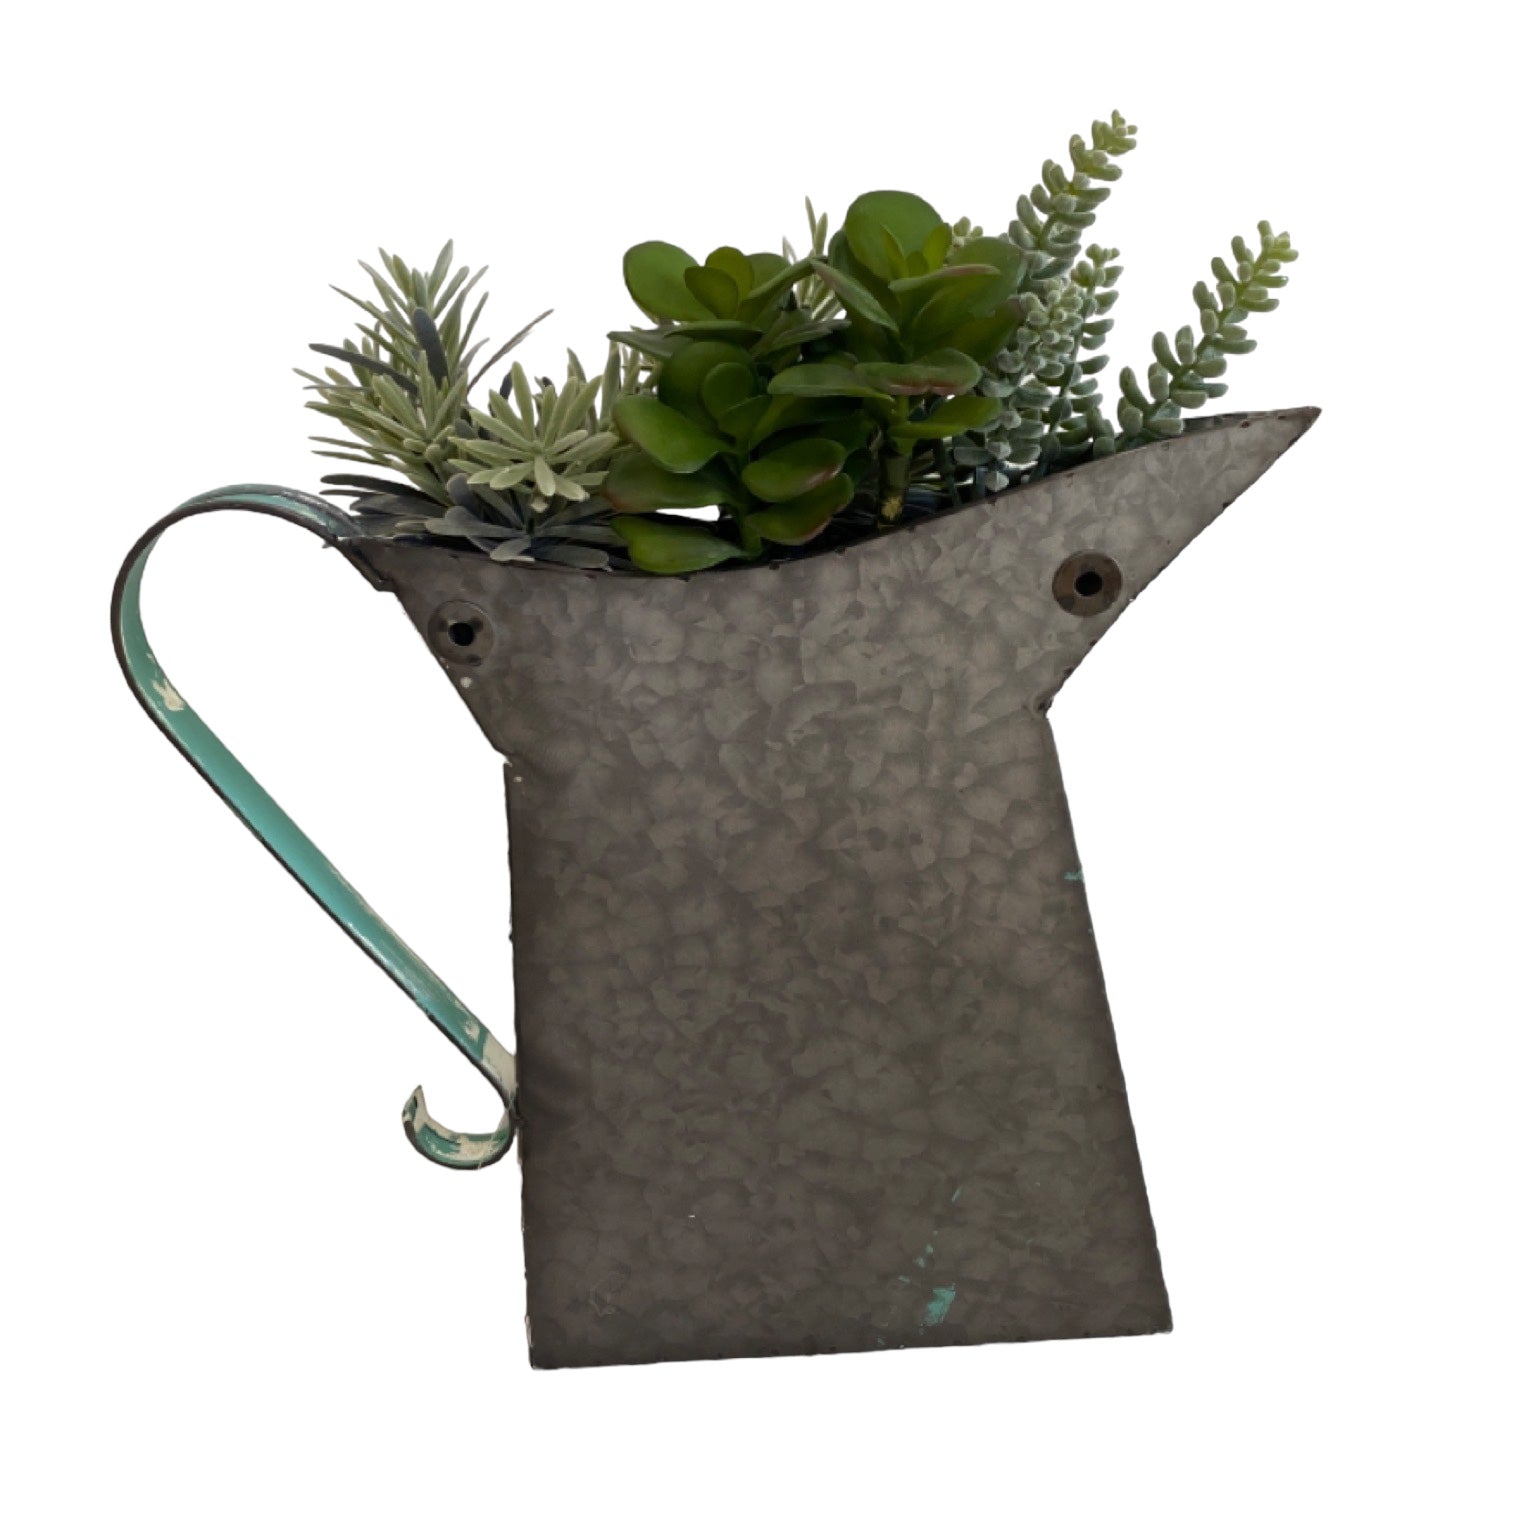 Planter Wall Large Jug or Vase Hanging - The Renmy Store Homewares & Gifts 